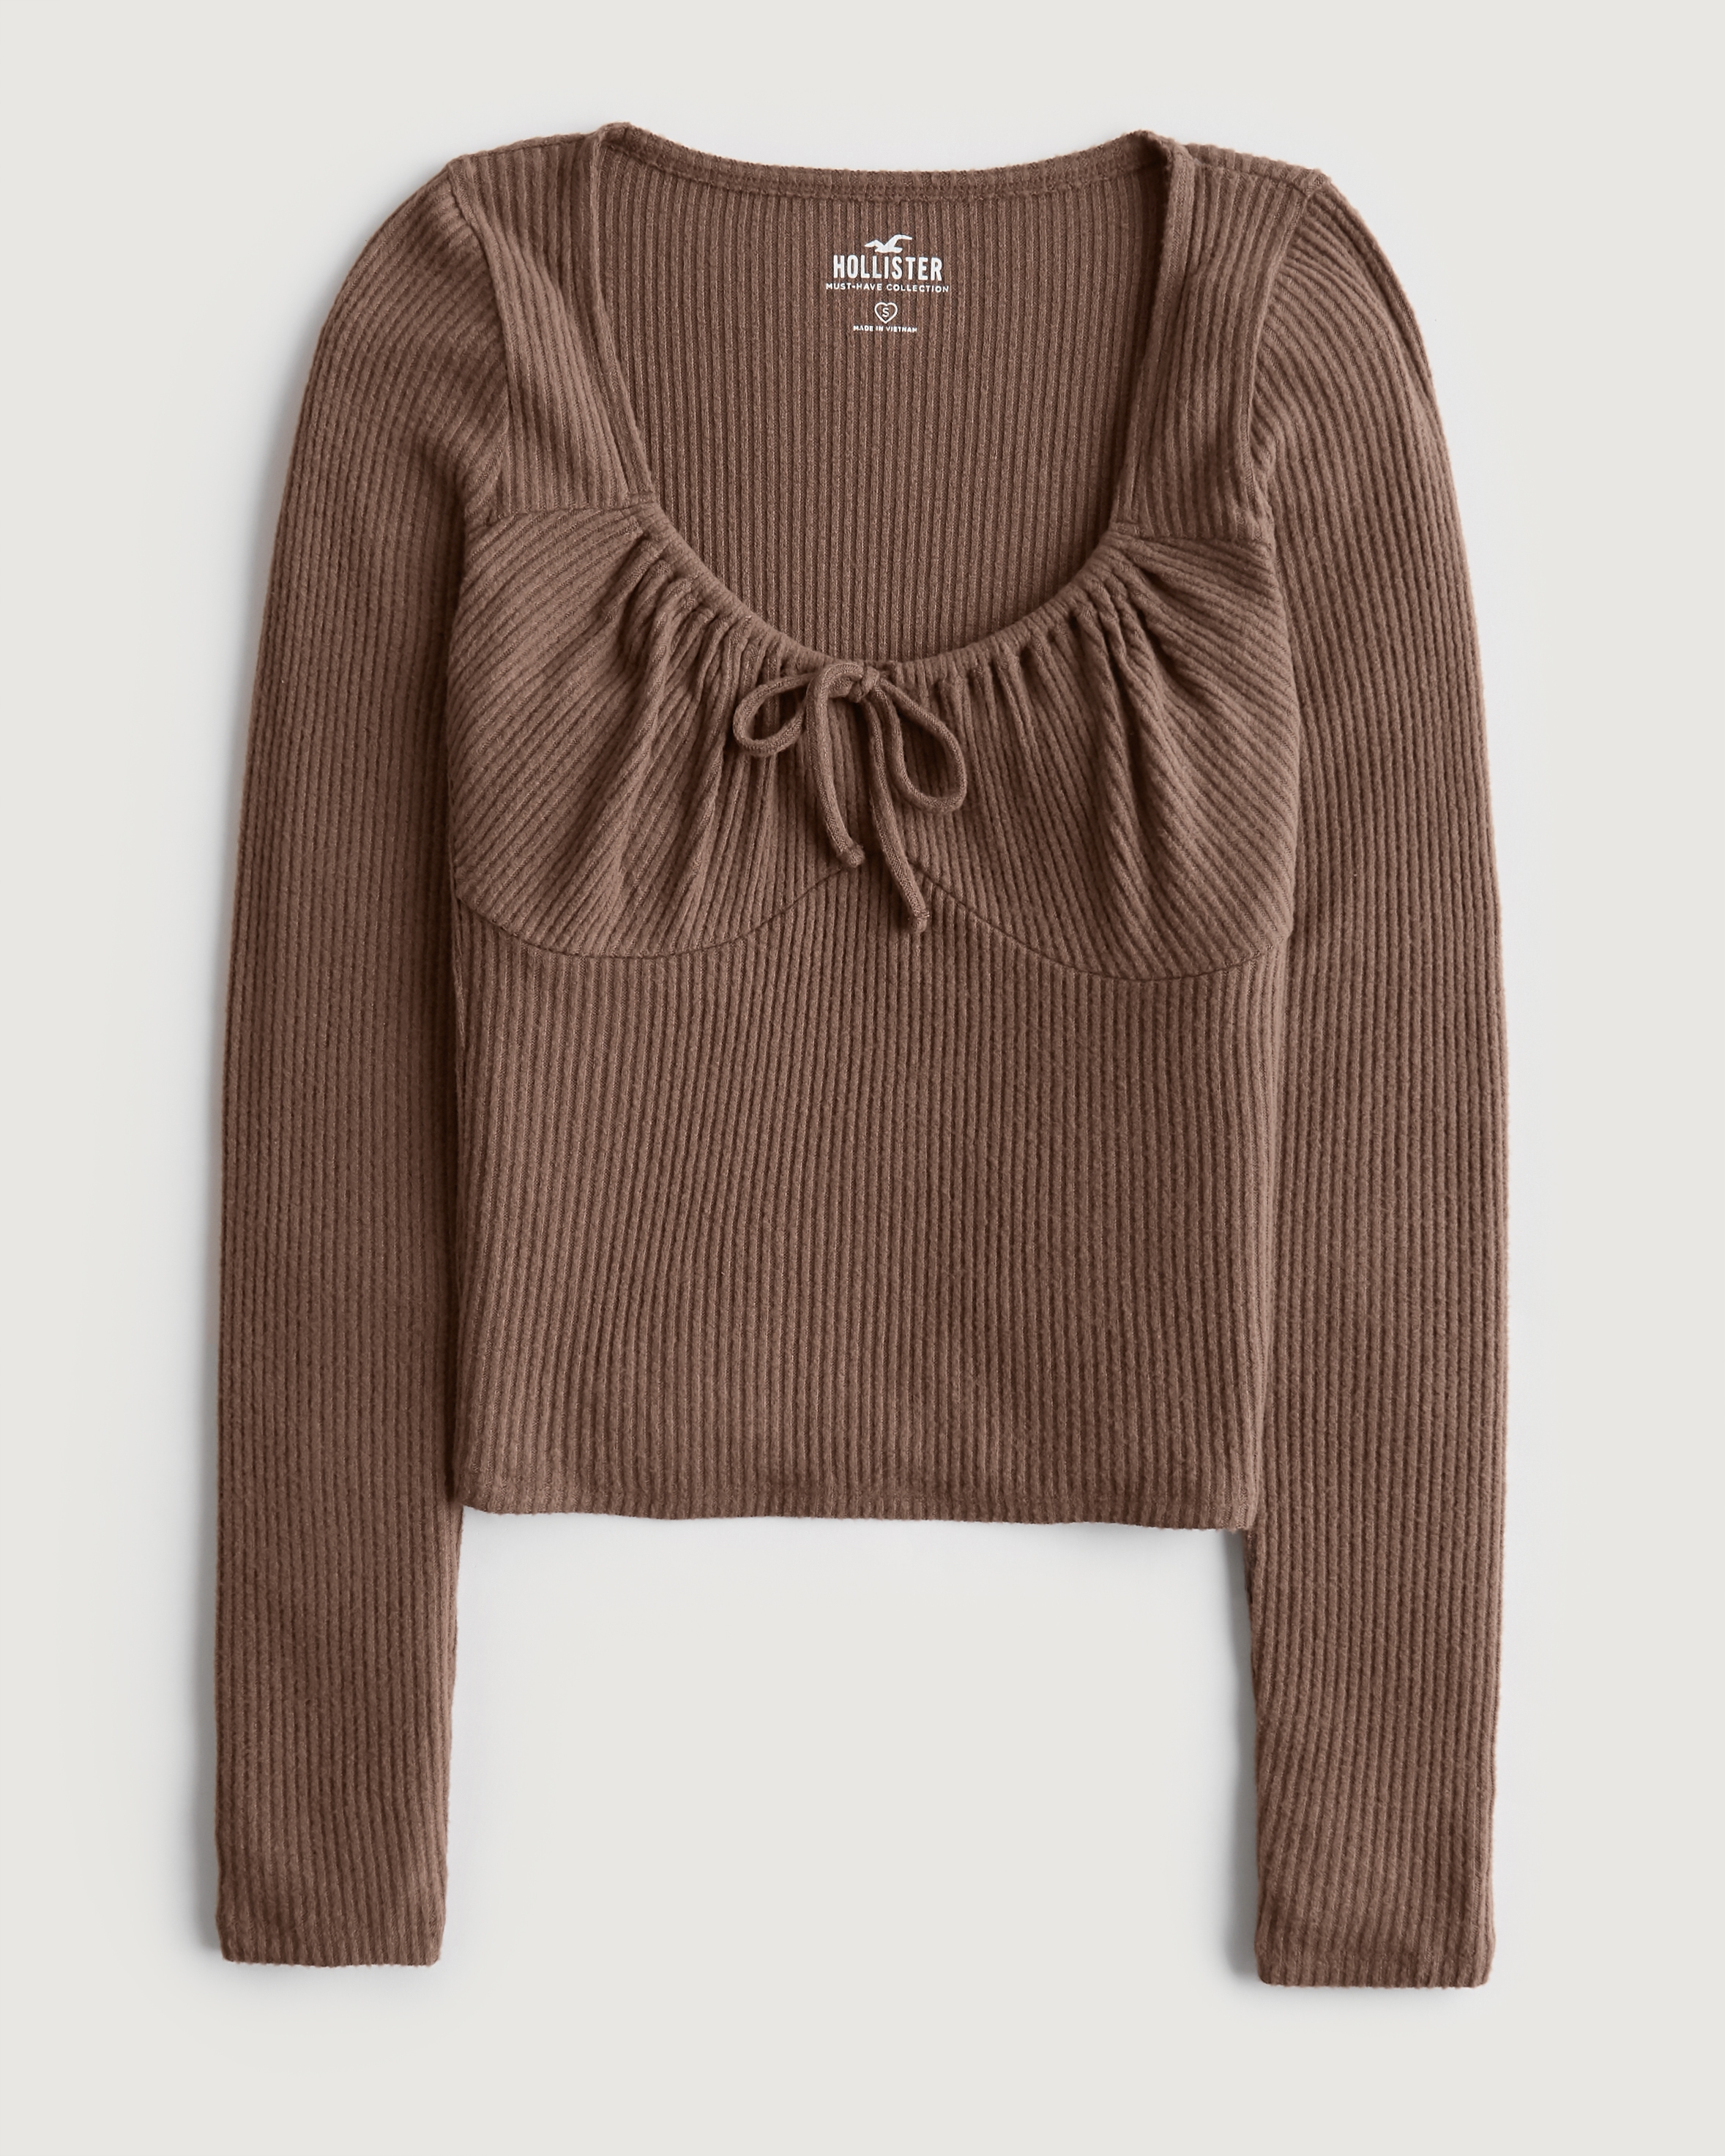 Hollister Cozy Ribbed Top